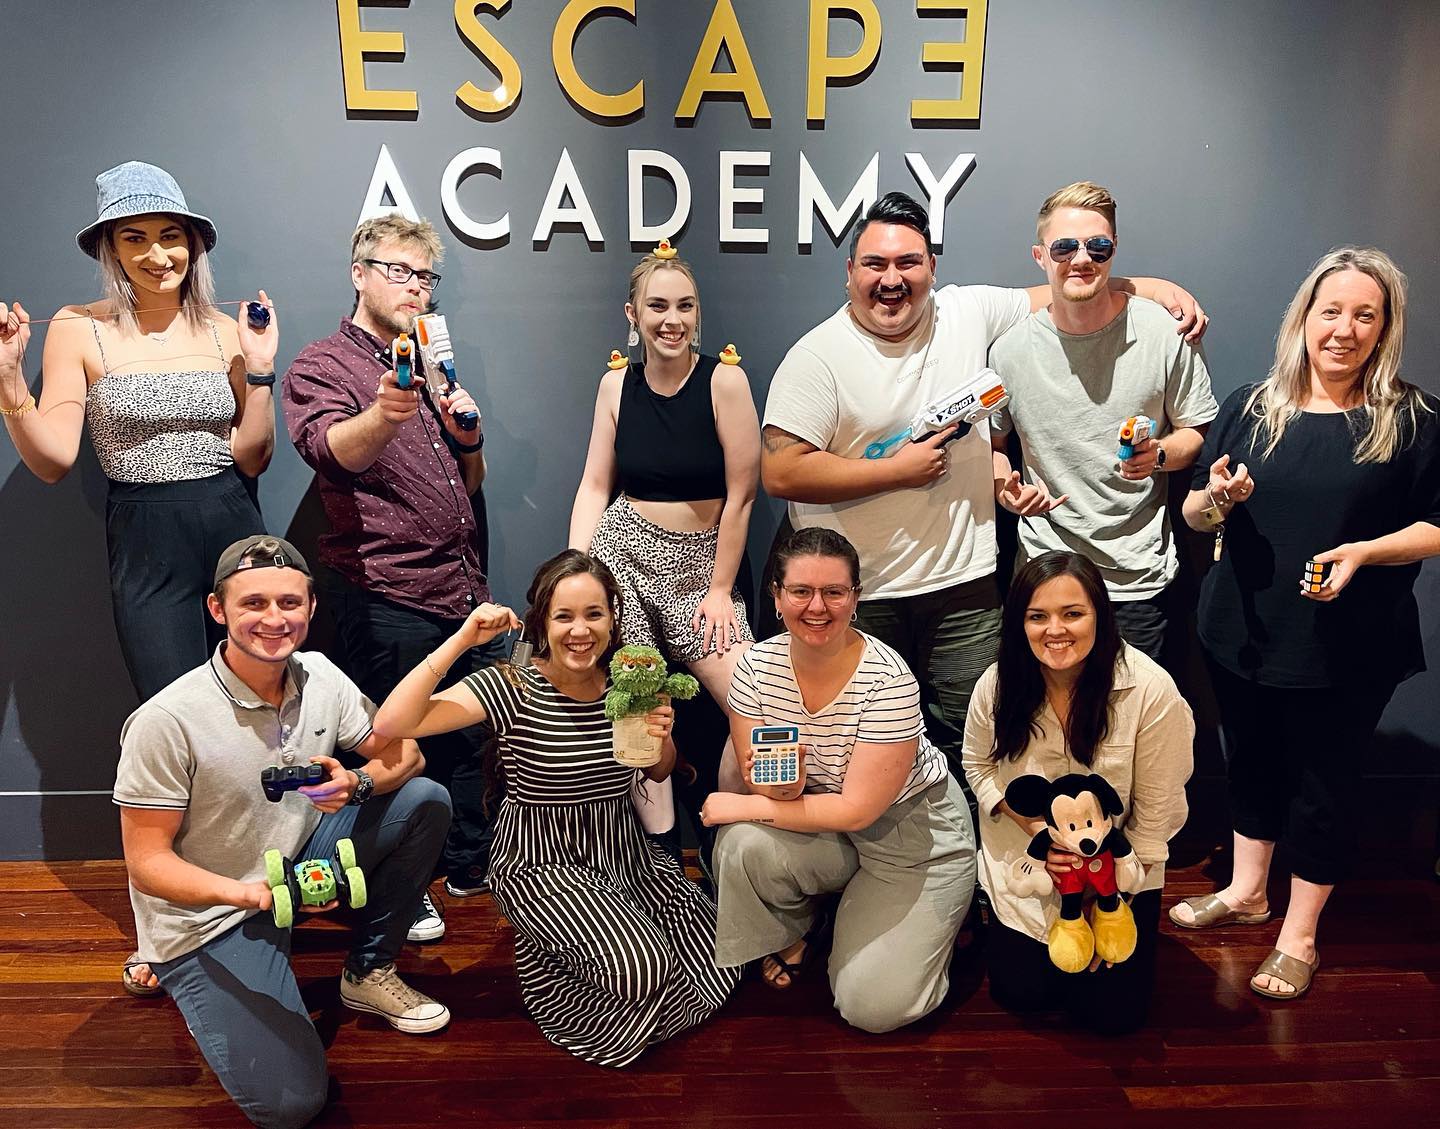 Today was the last day of lessons for Term 3, so we decided to go out as a team for a mission at @EscapeAcademyNQ 🧐🧩👏🔓